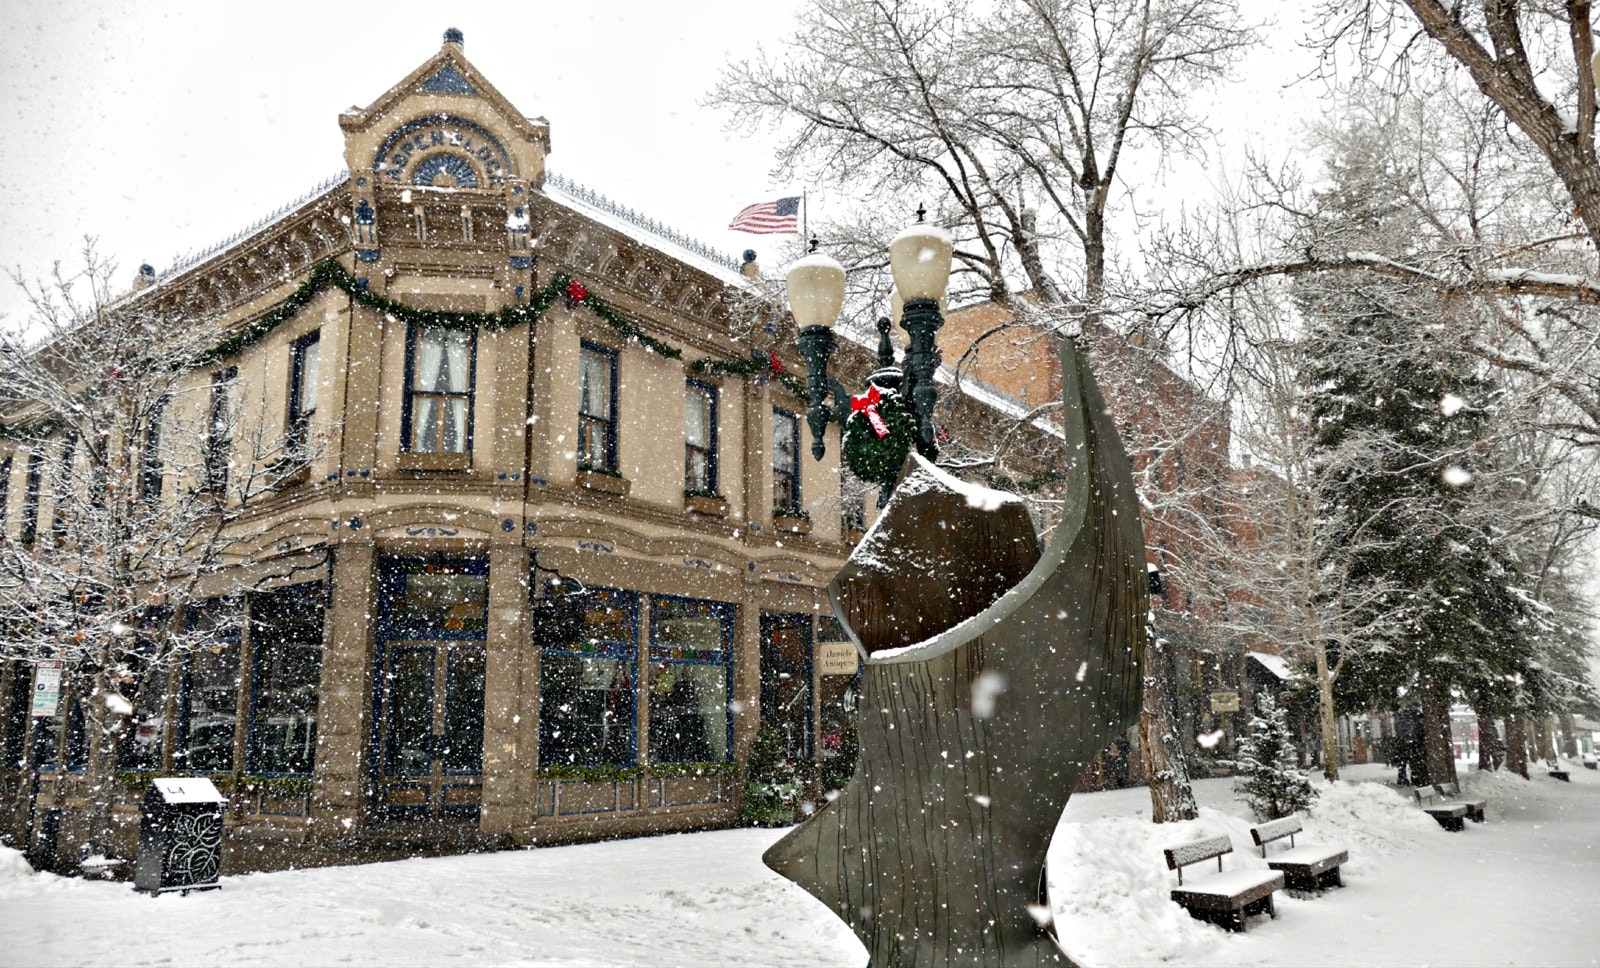 A downtown Aspen, Colorado building in the snow with a sculpture out front